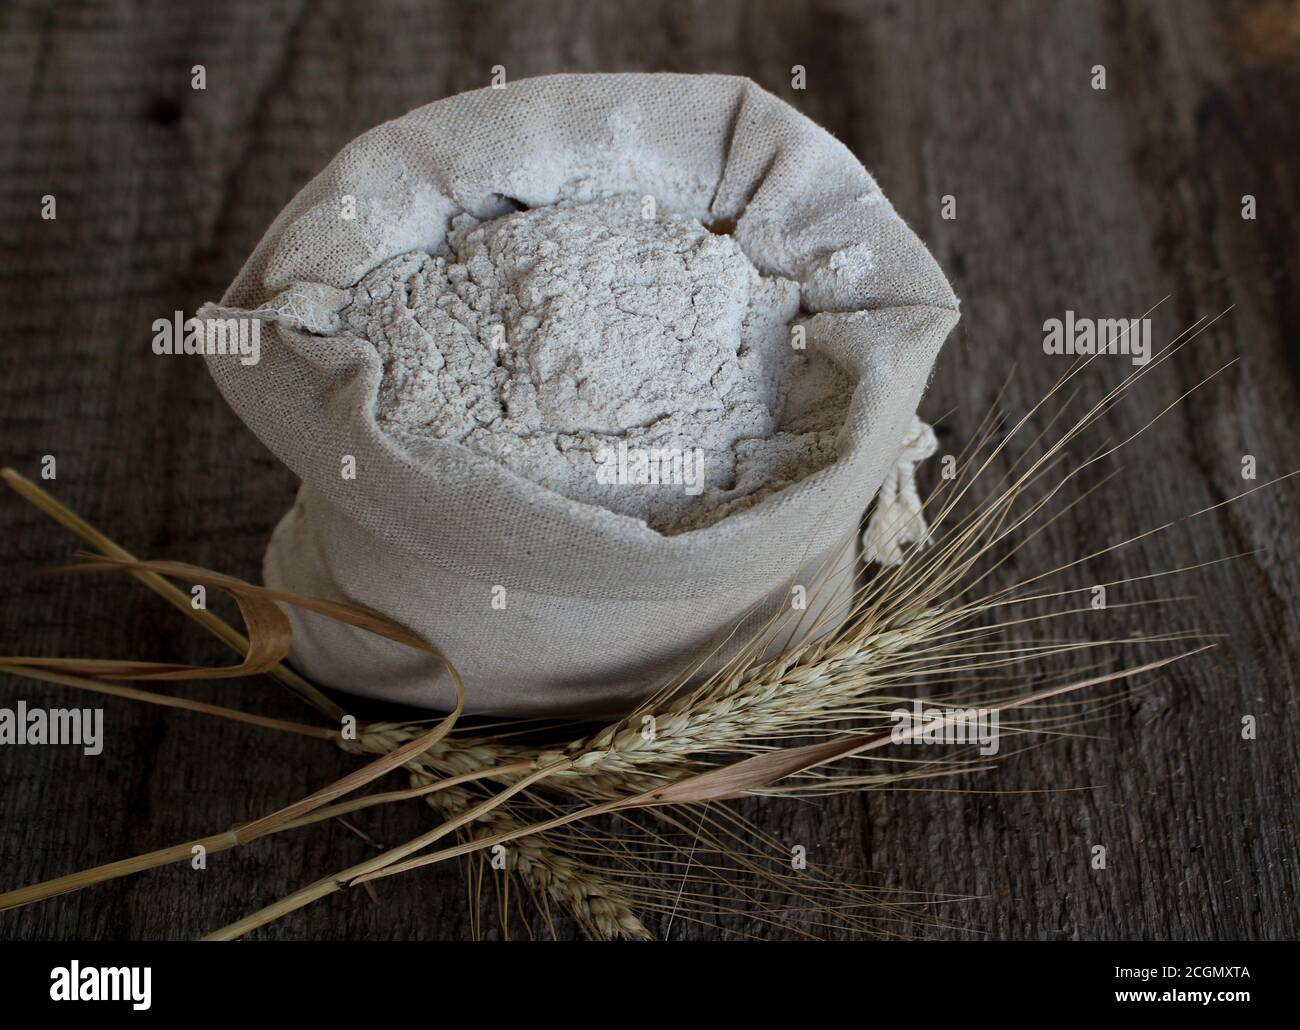 Wheat weazing and a linen bag with flour. Stock Photo